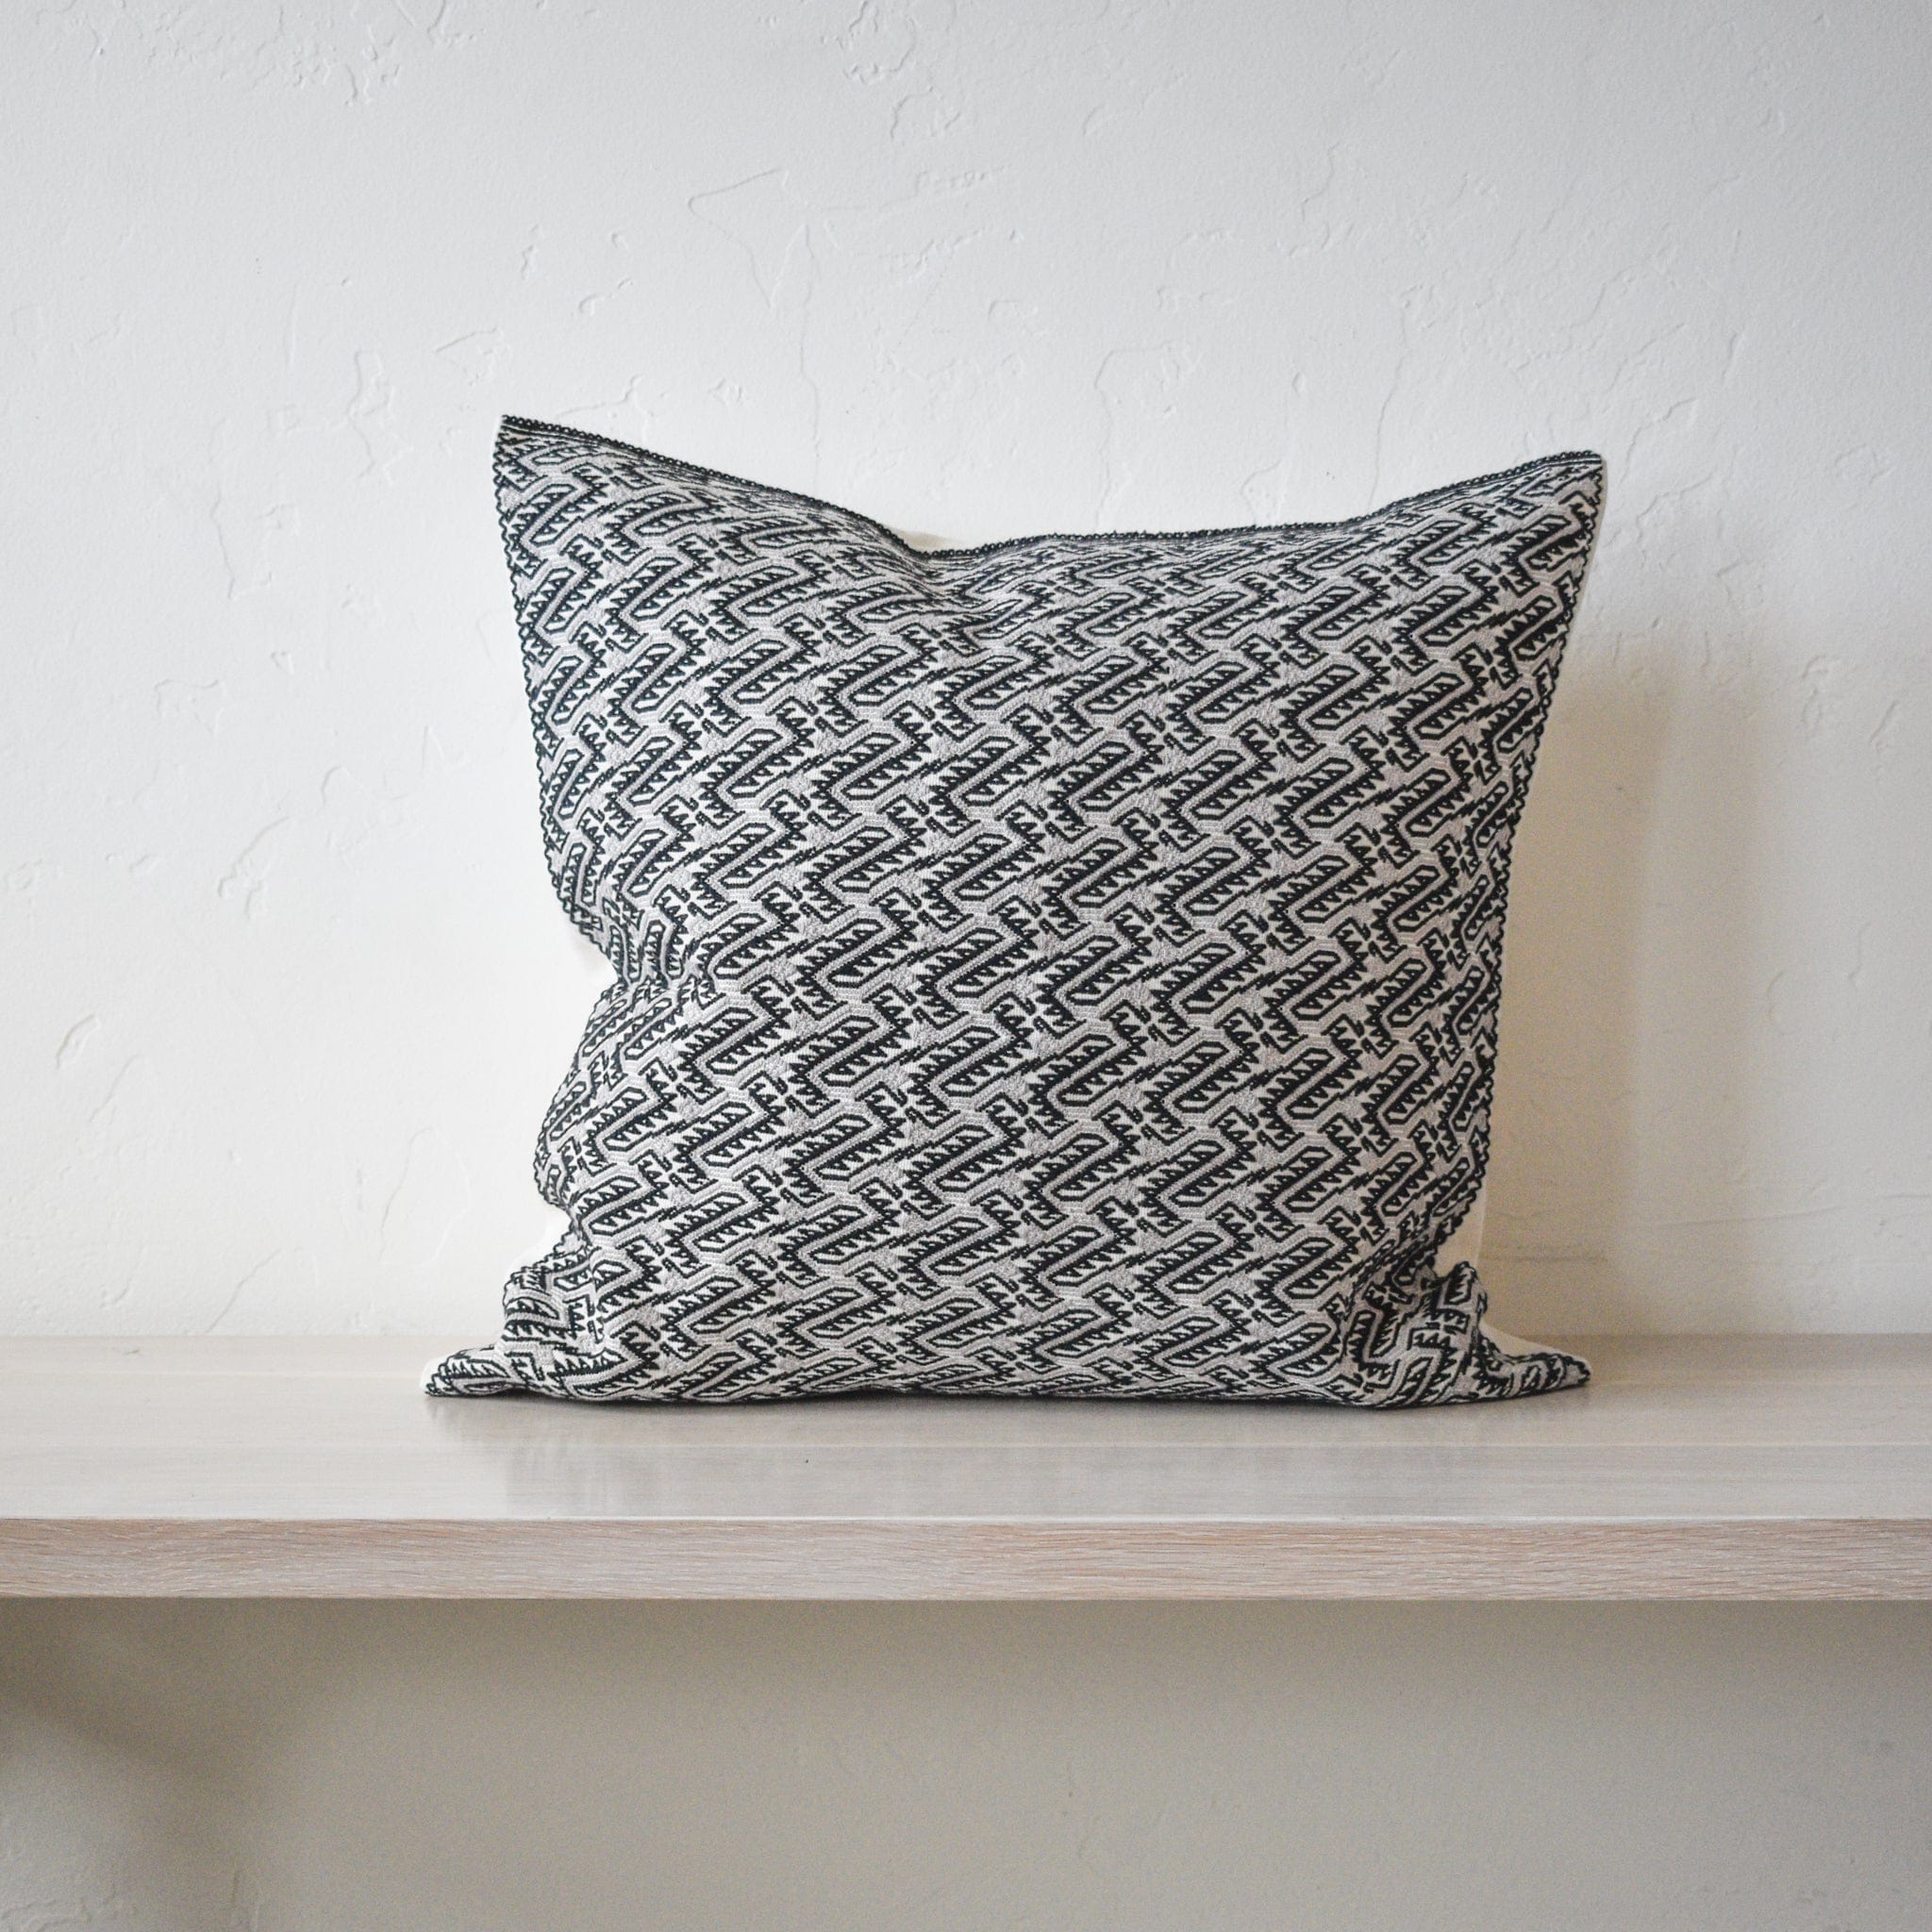 ONORA Linens, Decor Black White and Grey Brocade Pillow